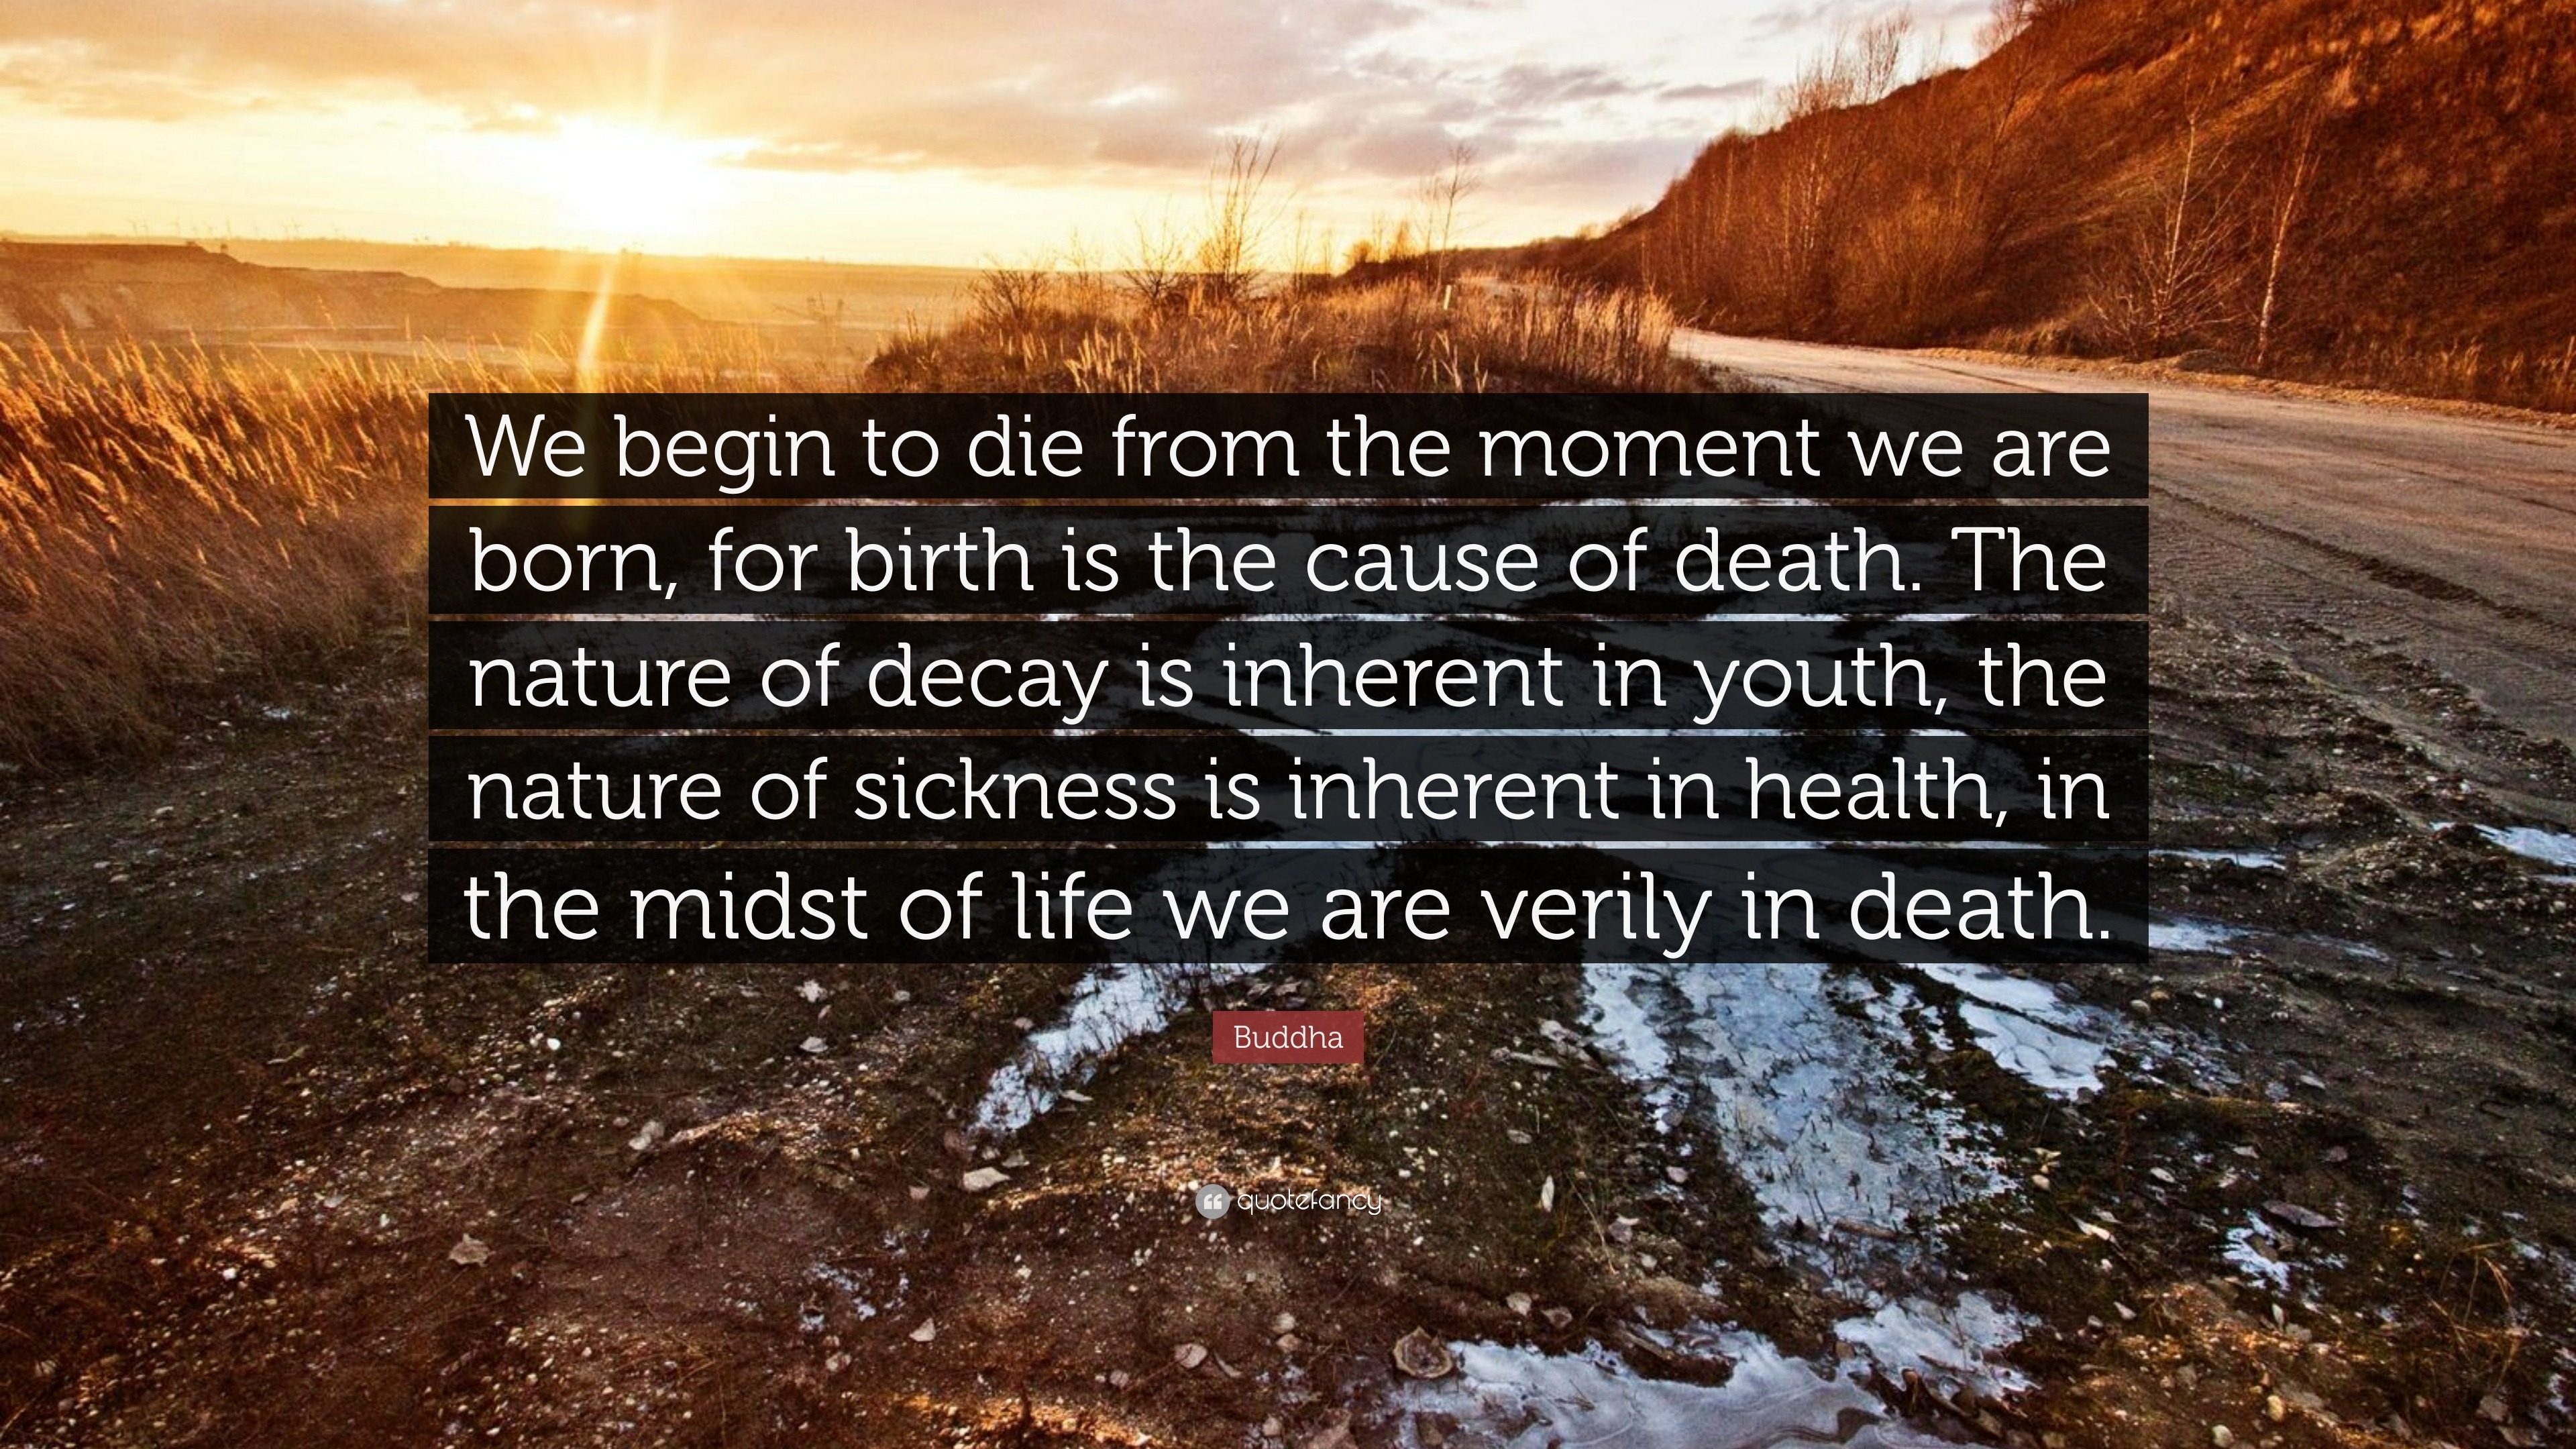 558163 Buddha Quote We begin to die from the moment we are born for birth